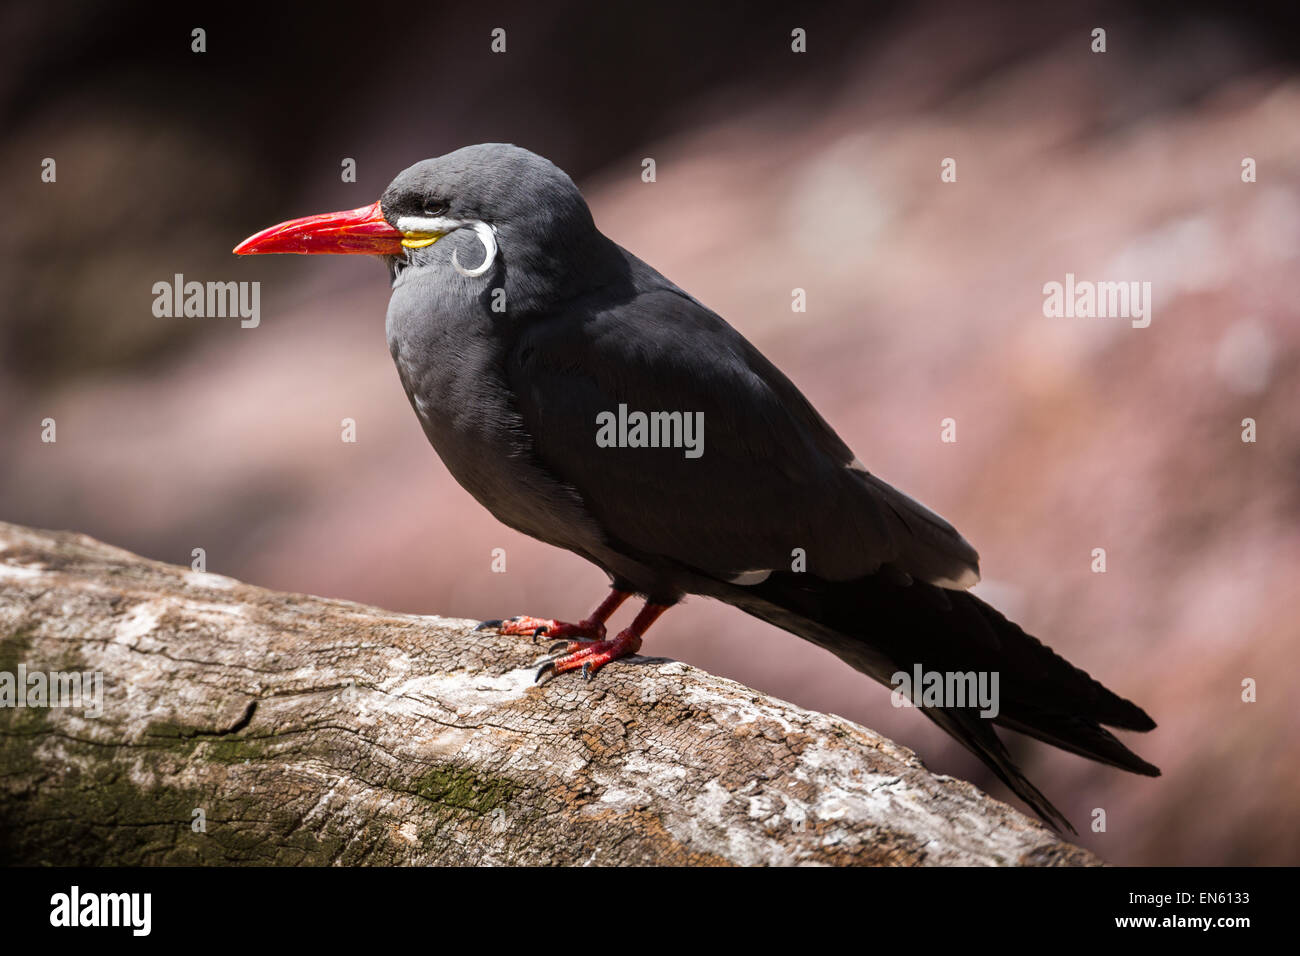 Inca tern perched on a tree. Stock Photo